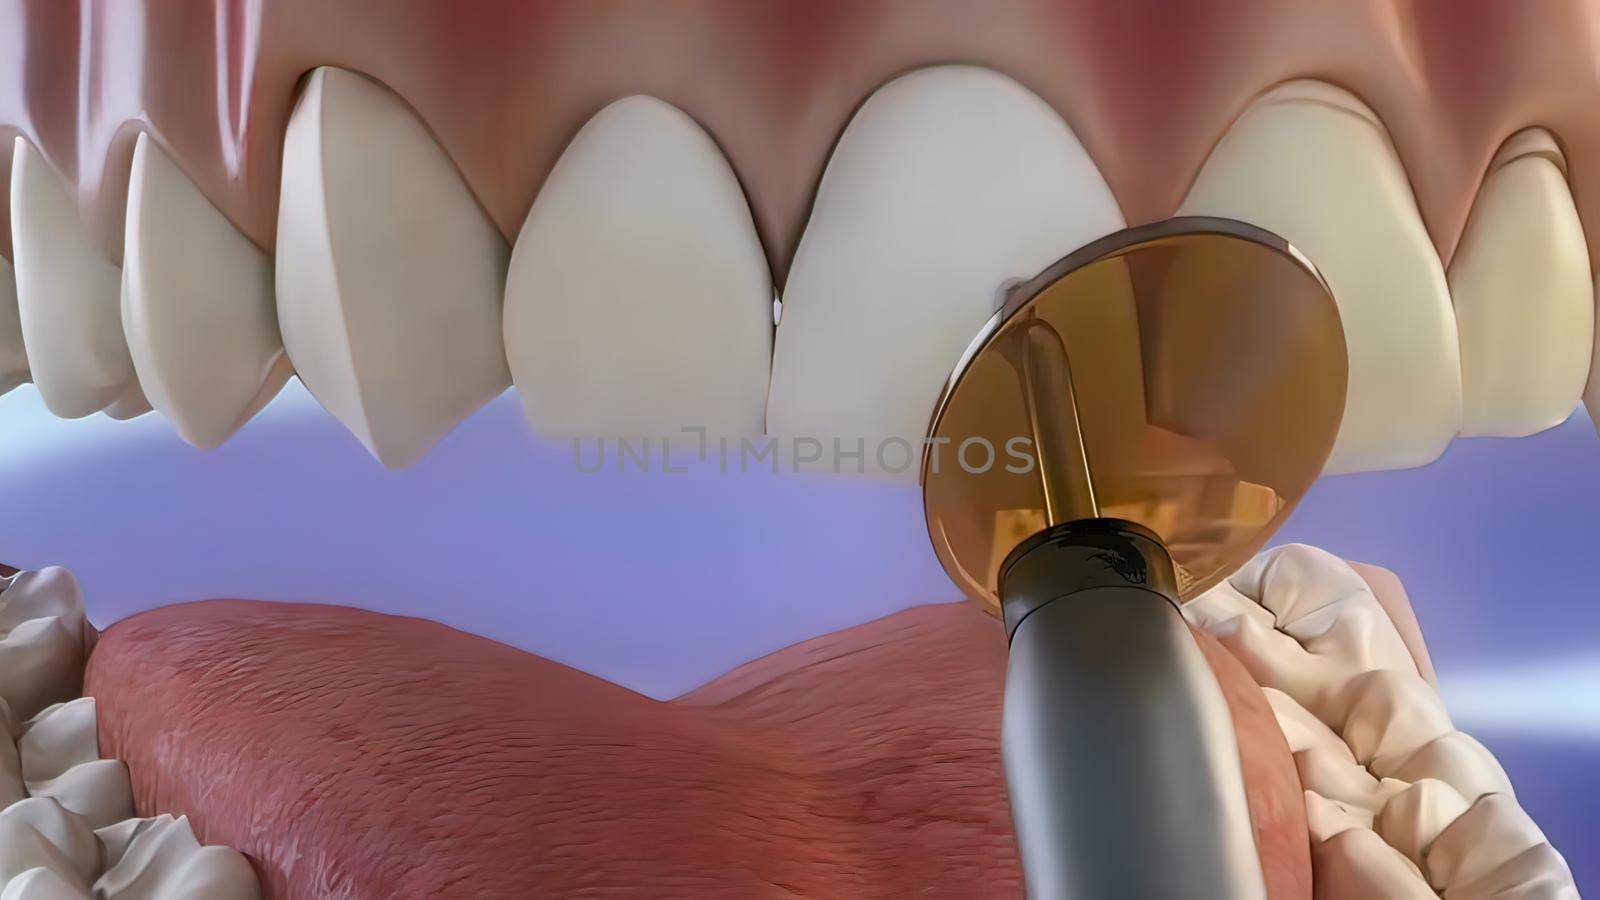 Tooth coating process, drying with adhesive beam 3D illustration